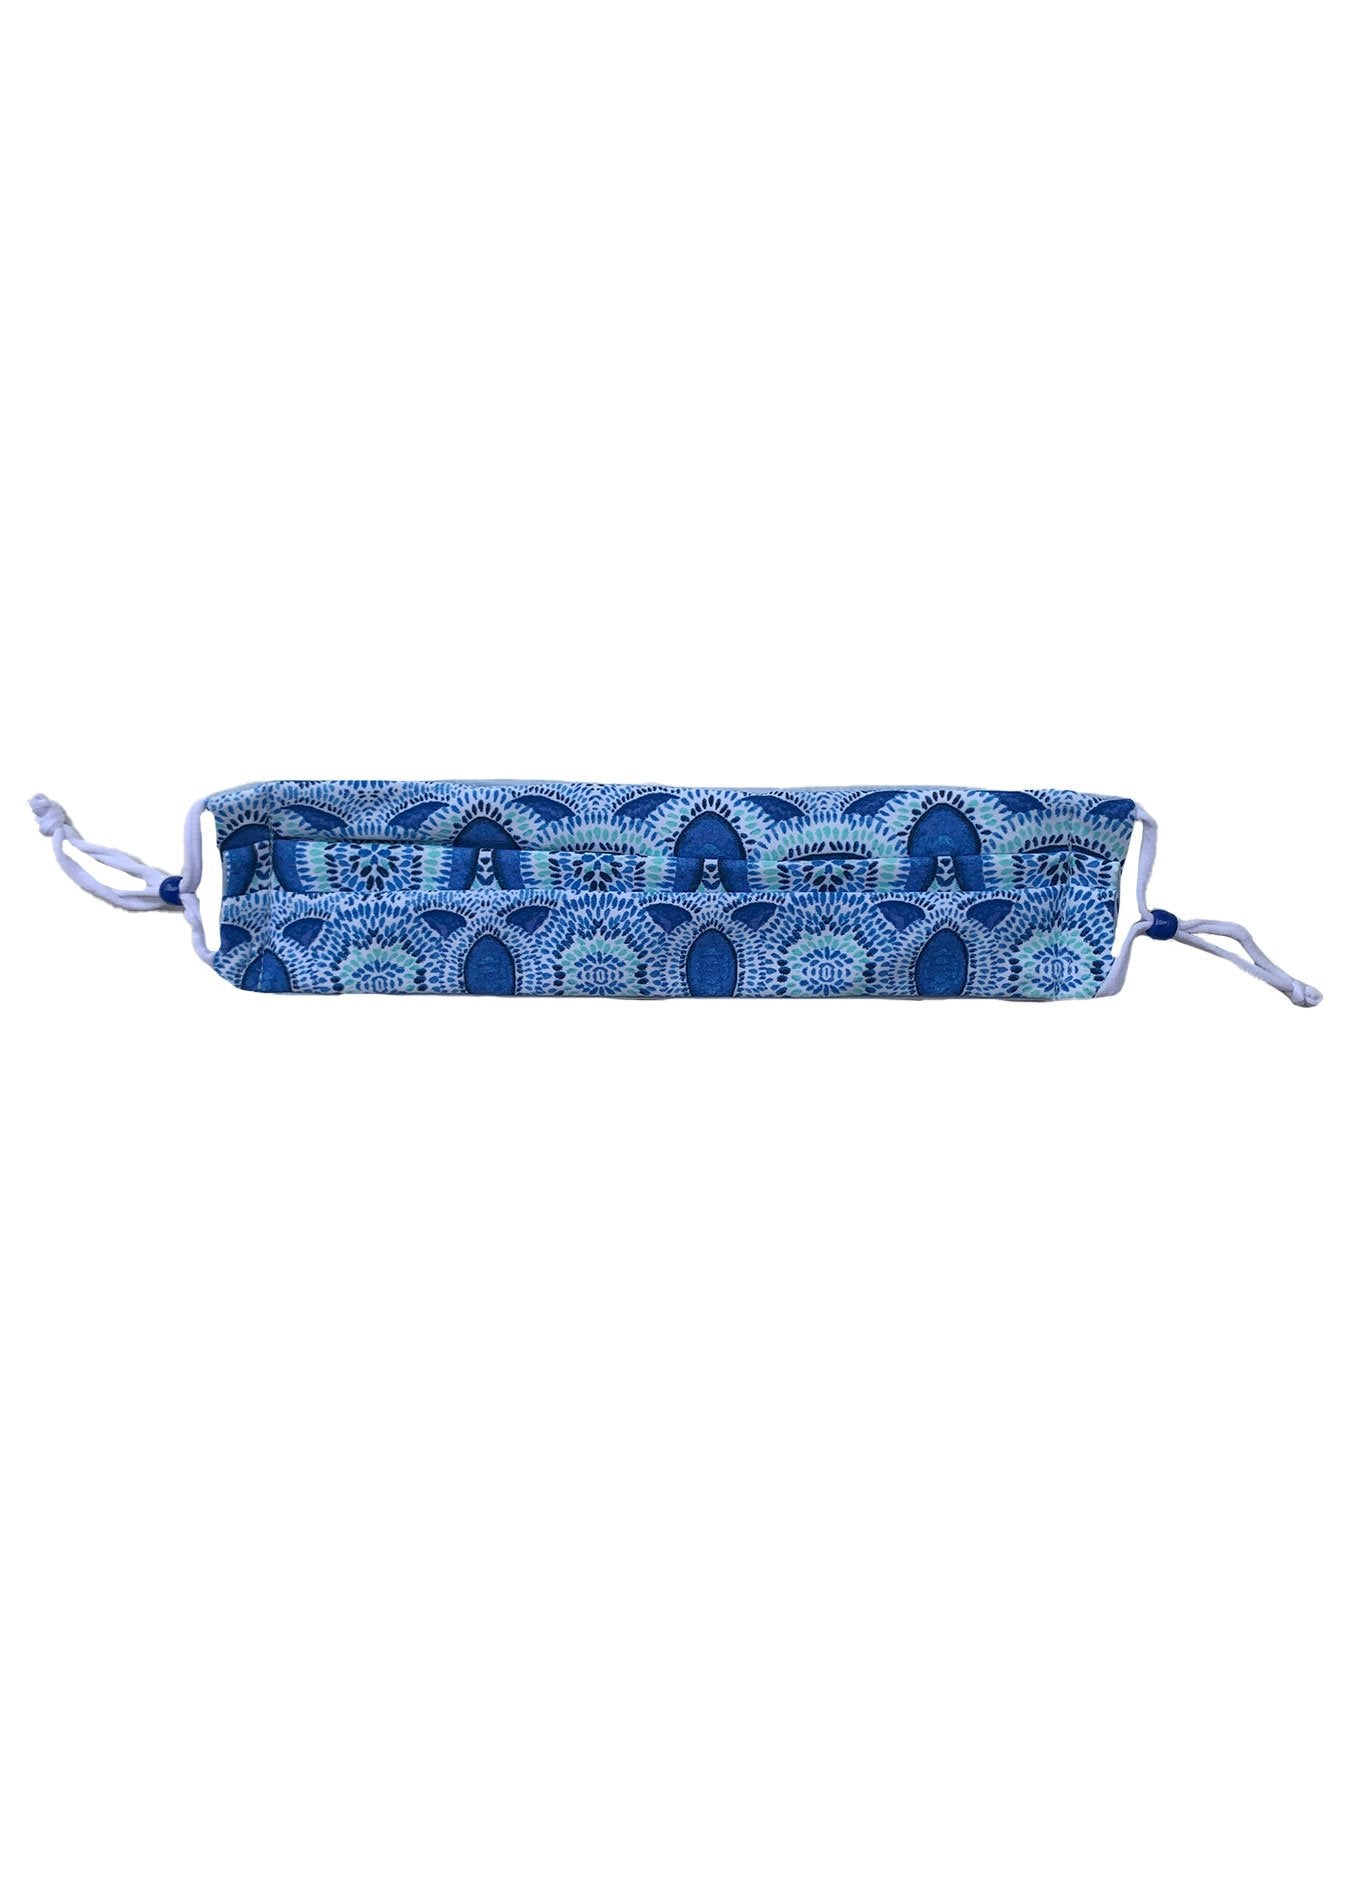 Roadmap Pleated face mask. Deep blue and aqua abstract design with white adjustable ties and blue beads.